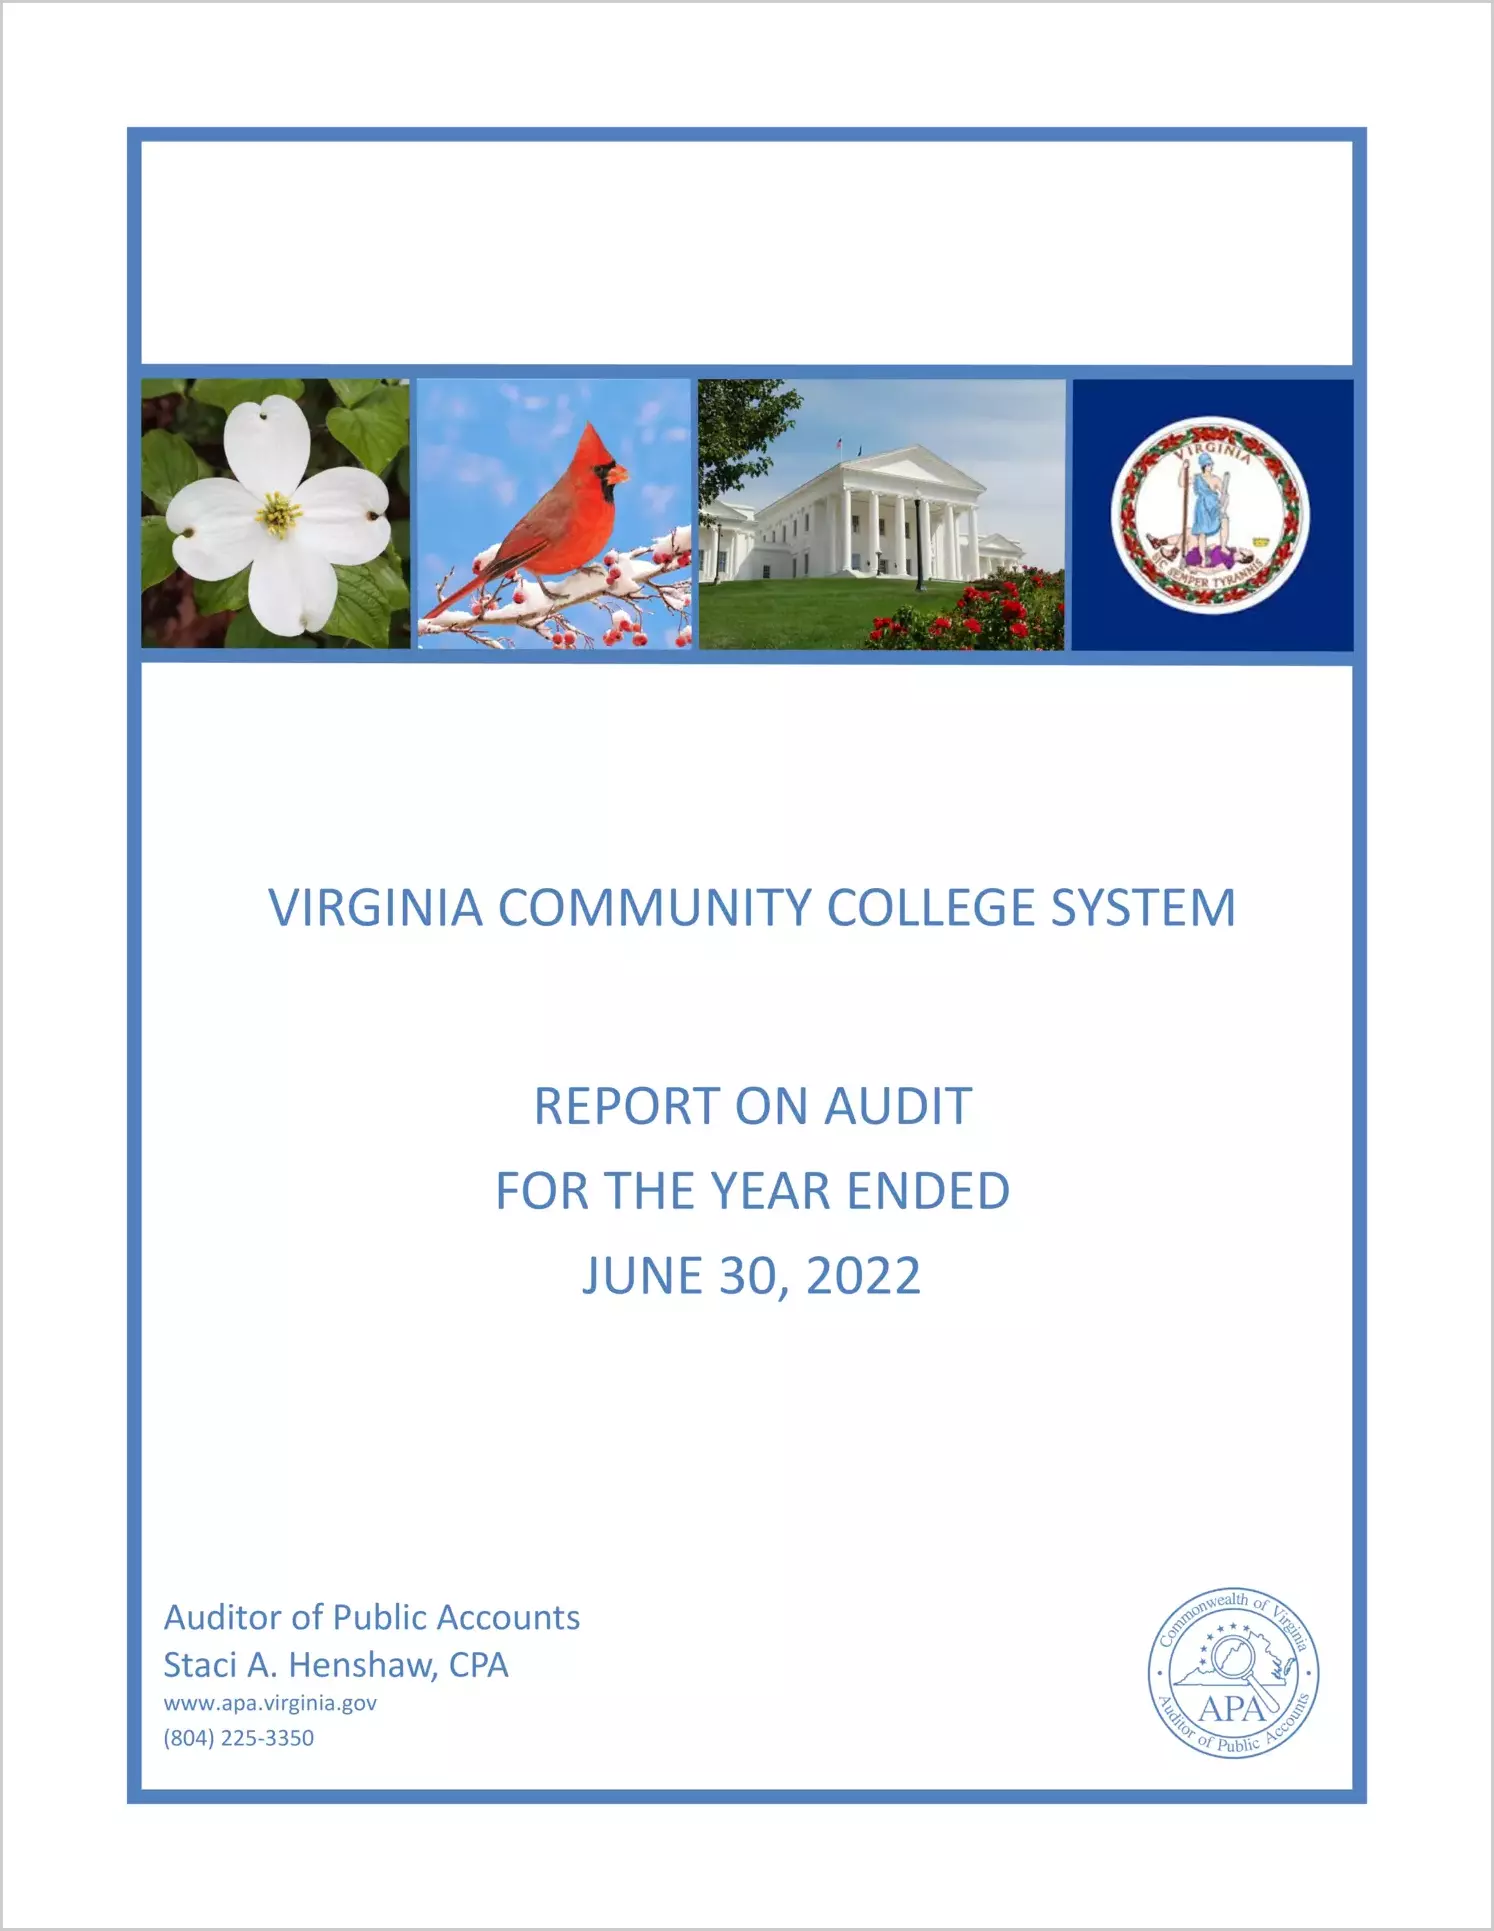 Virginia Community College System for the year ended June 30, 2022